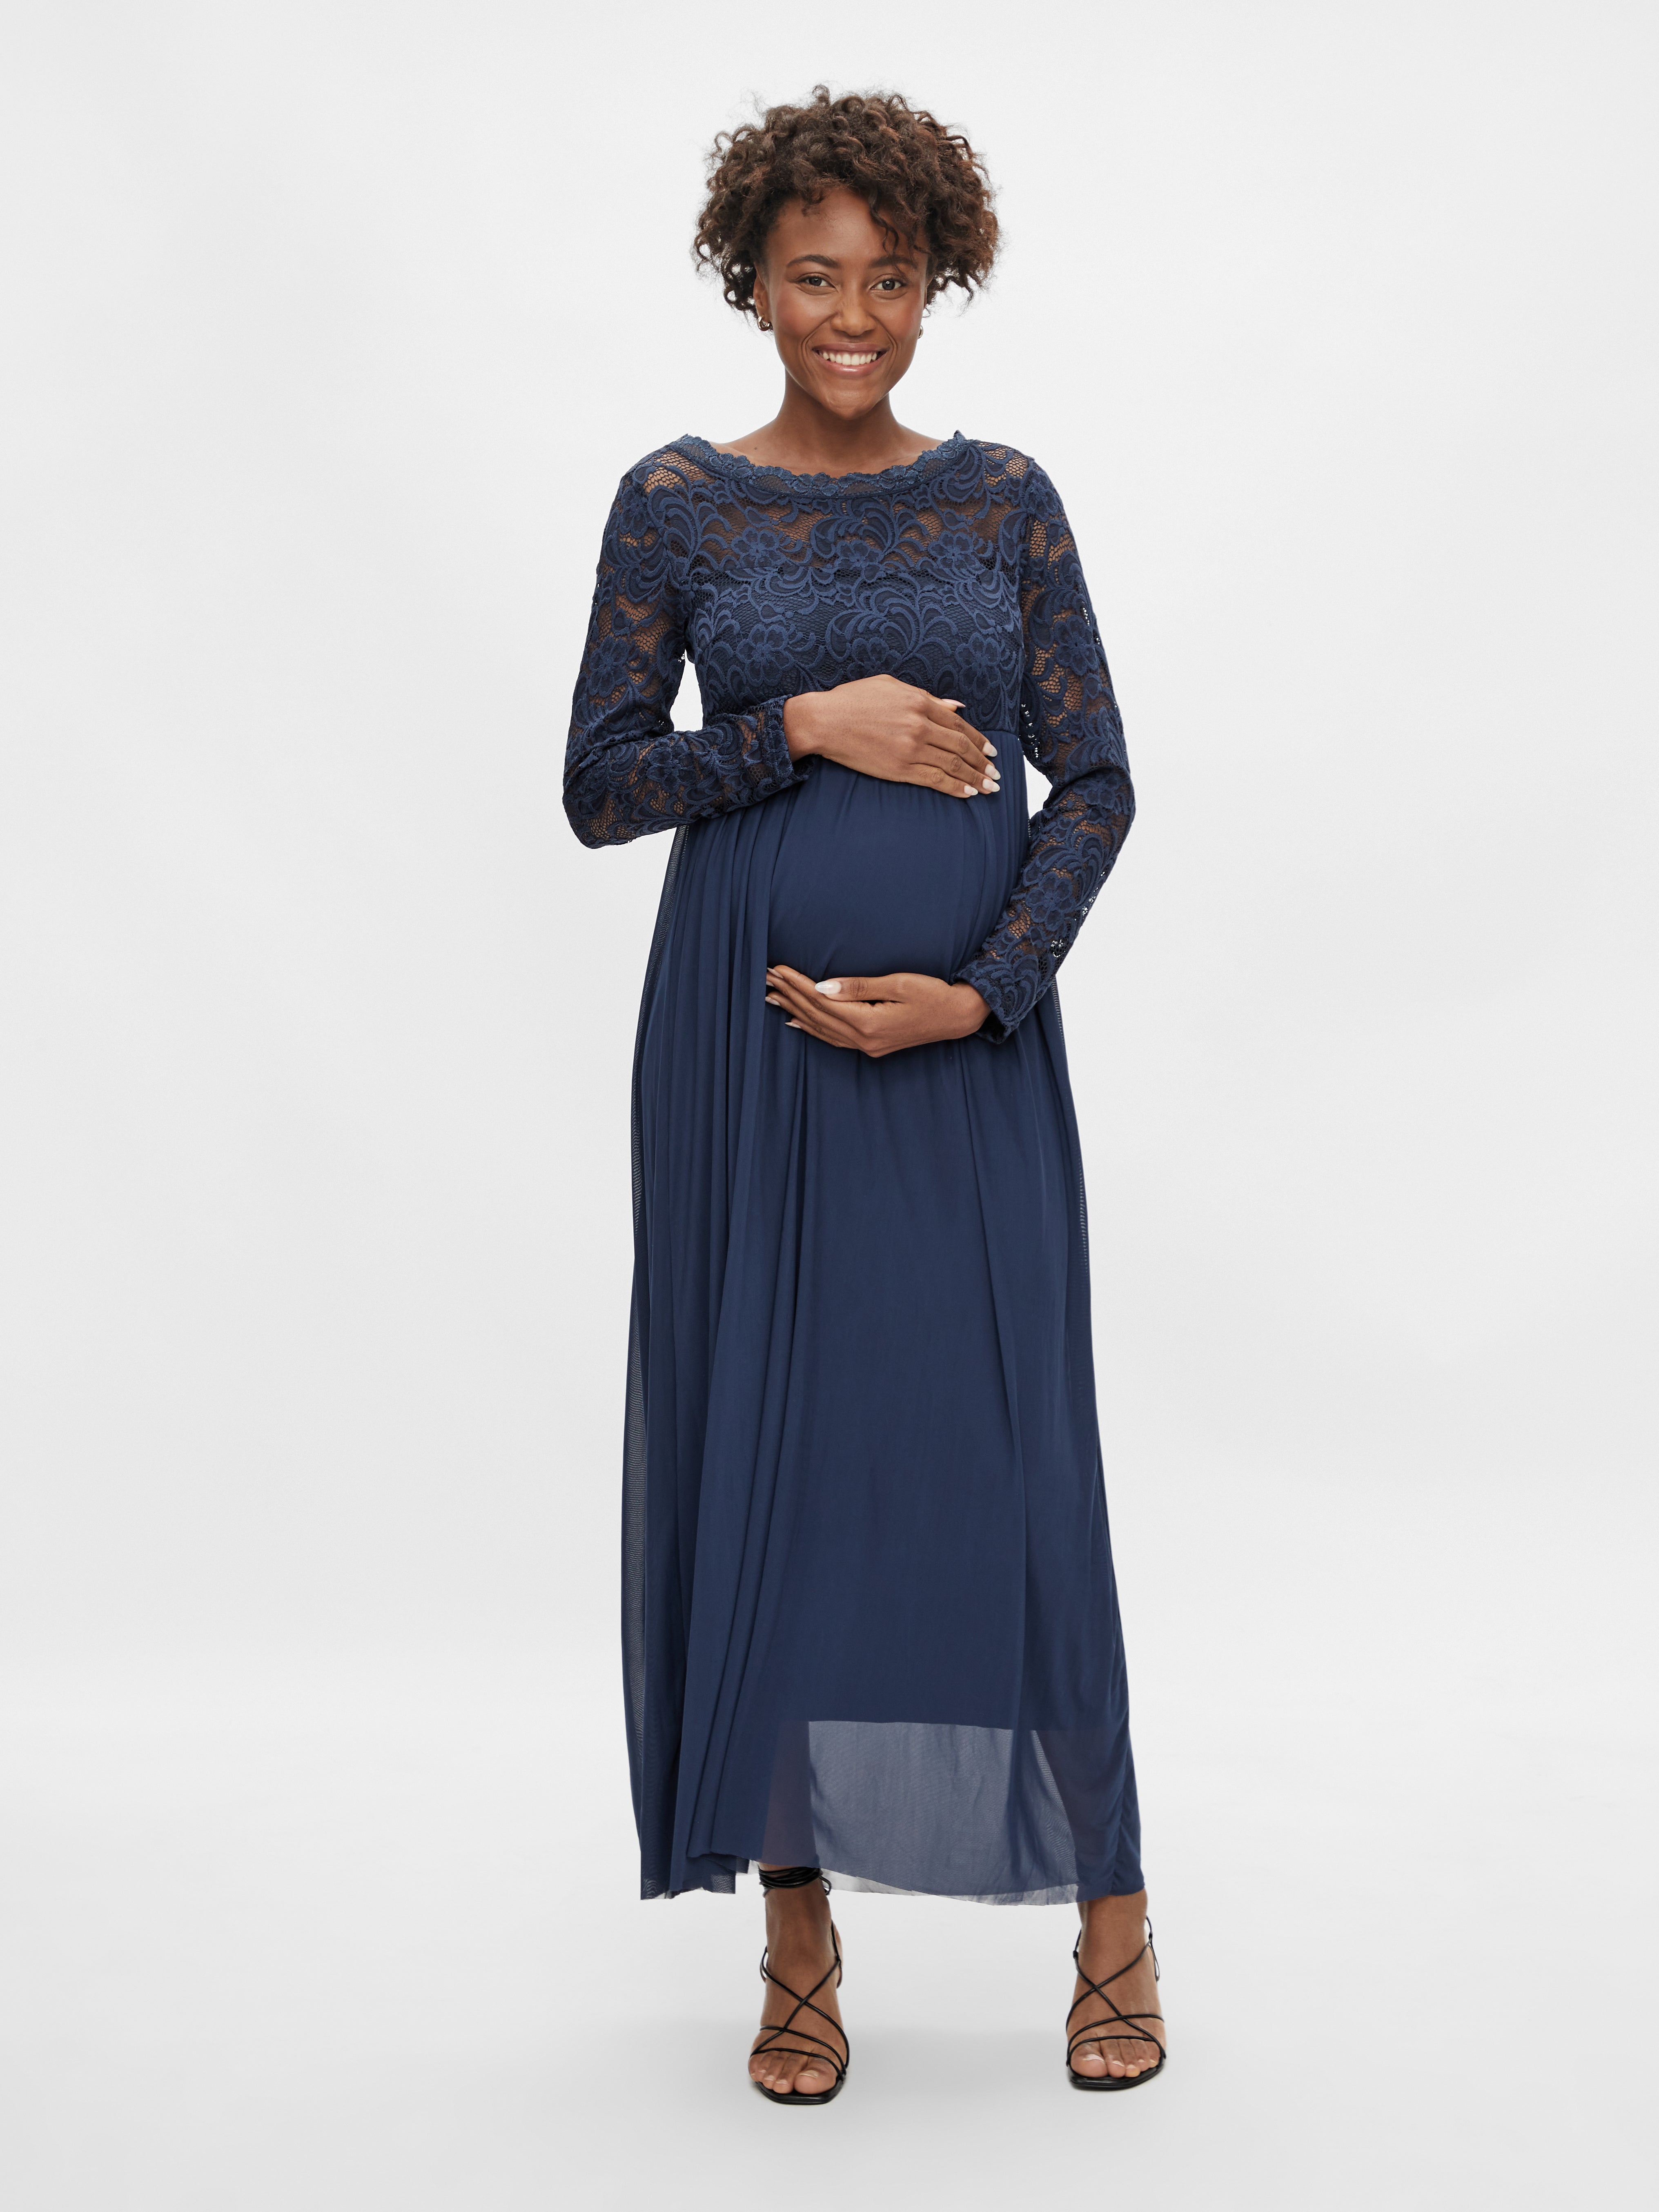 Elegant Off-shoulder Maternity Gown at Rs 4500.00 | Maternity Maxi Dresses, Maternity  Evening Gowns, Maternity Formal Dresses, Maternity Party Dresses, Maternity  Ball Gowns - Pink Fabb, Delhi | ID: 26265462991